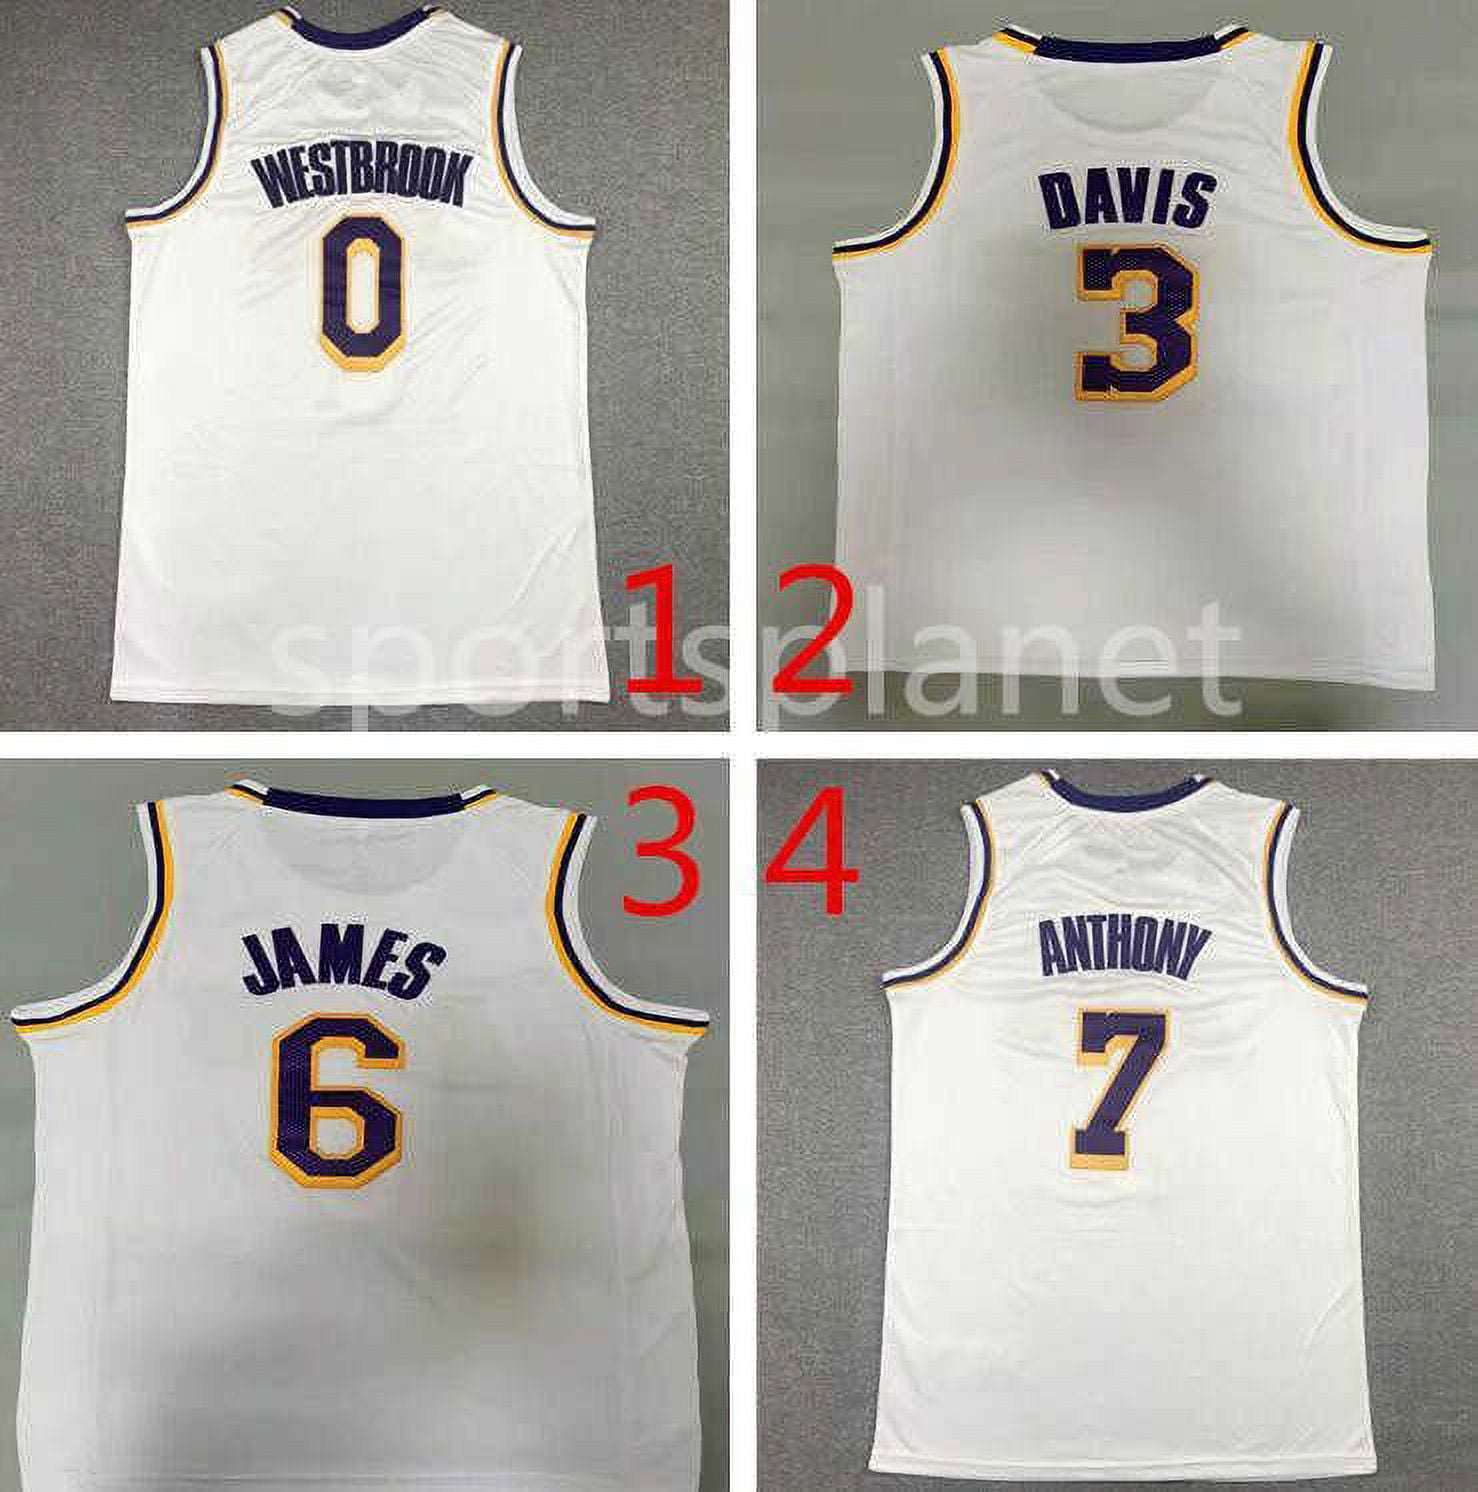 44 lakers jersey